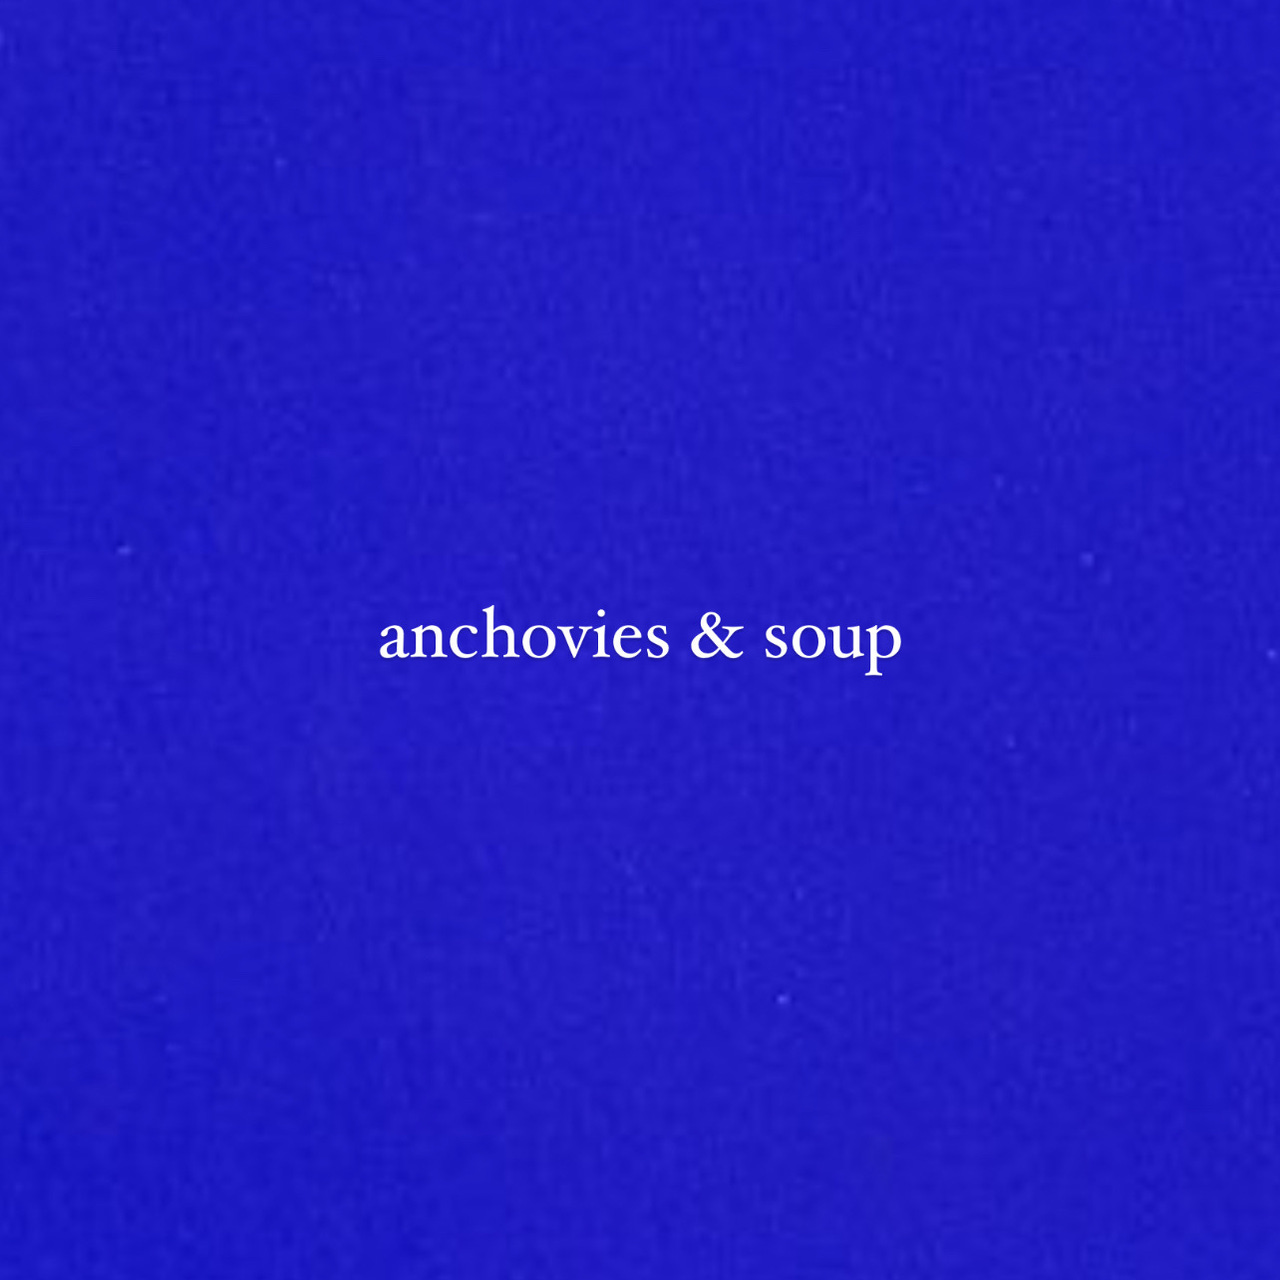 Artwork for anchovies & soup